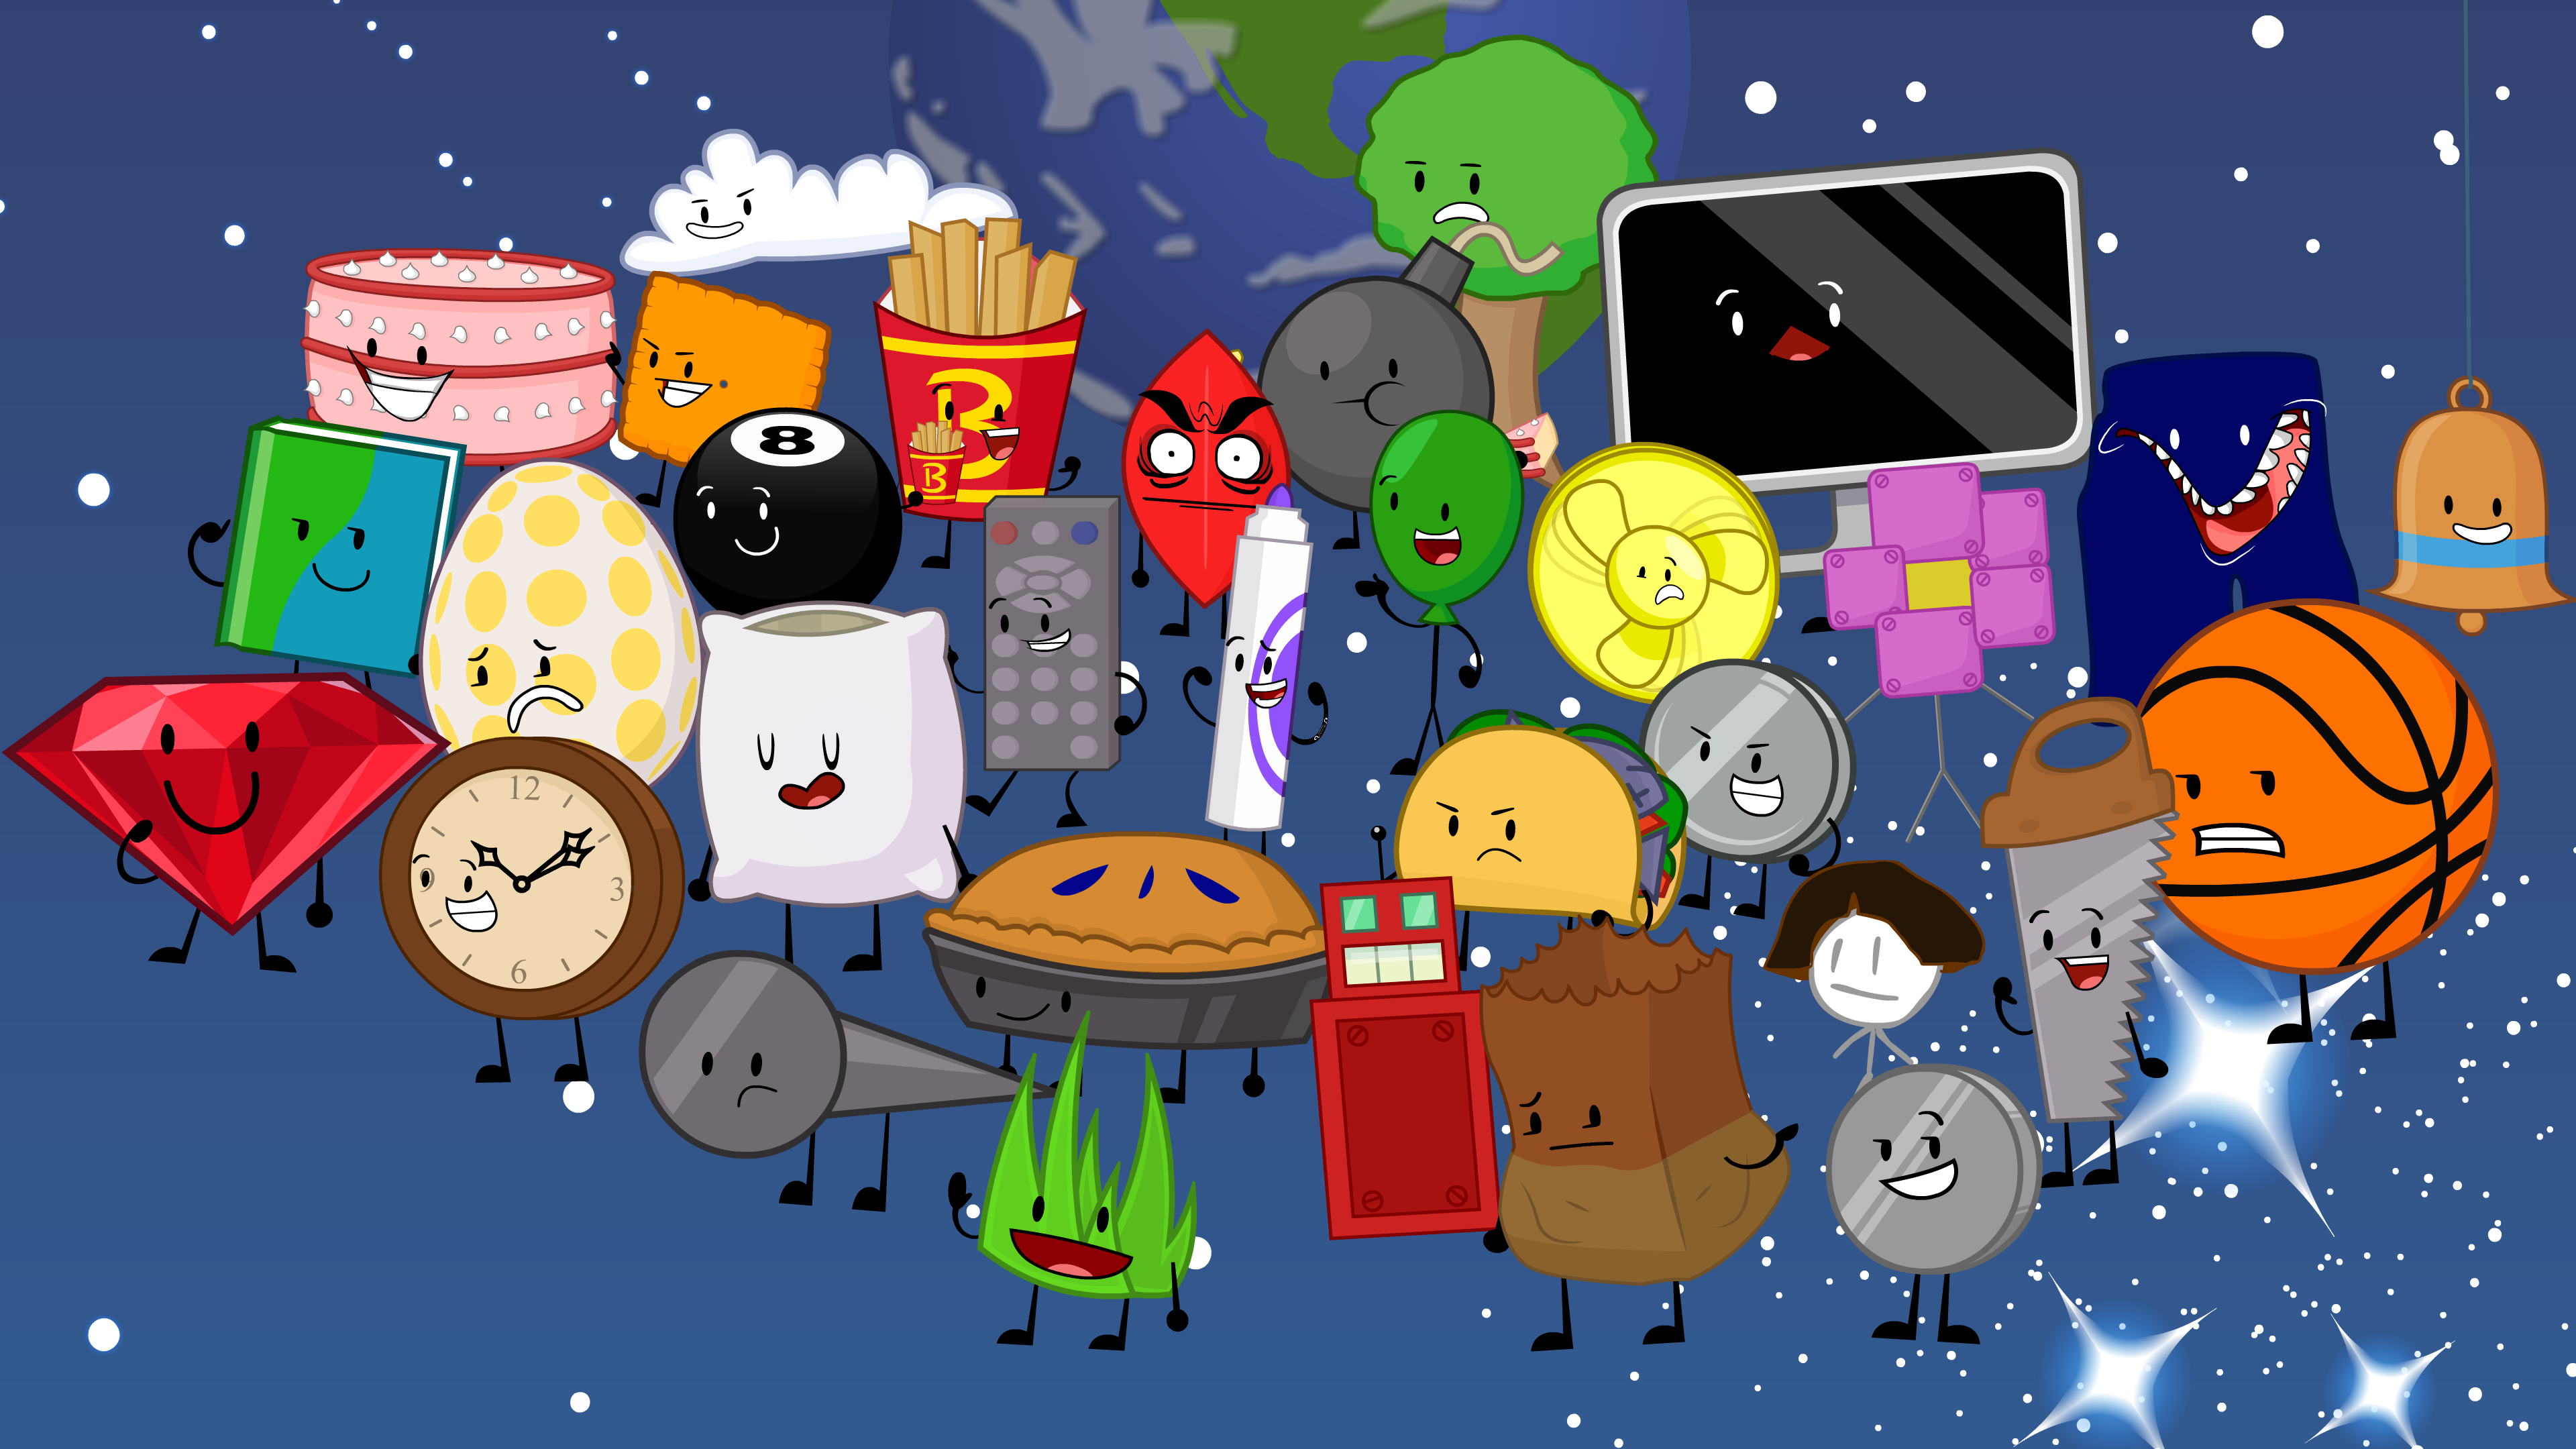 BFDI Assets Remade Again - Episode 5 